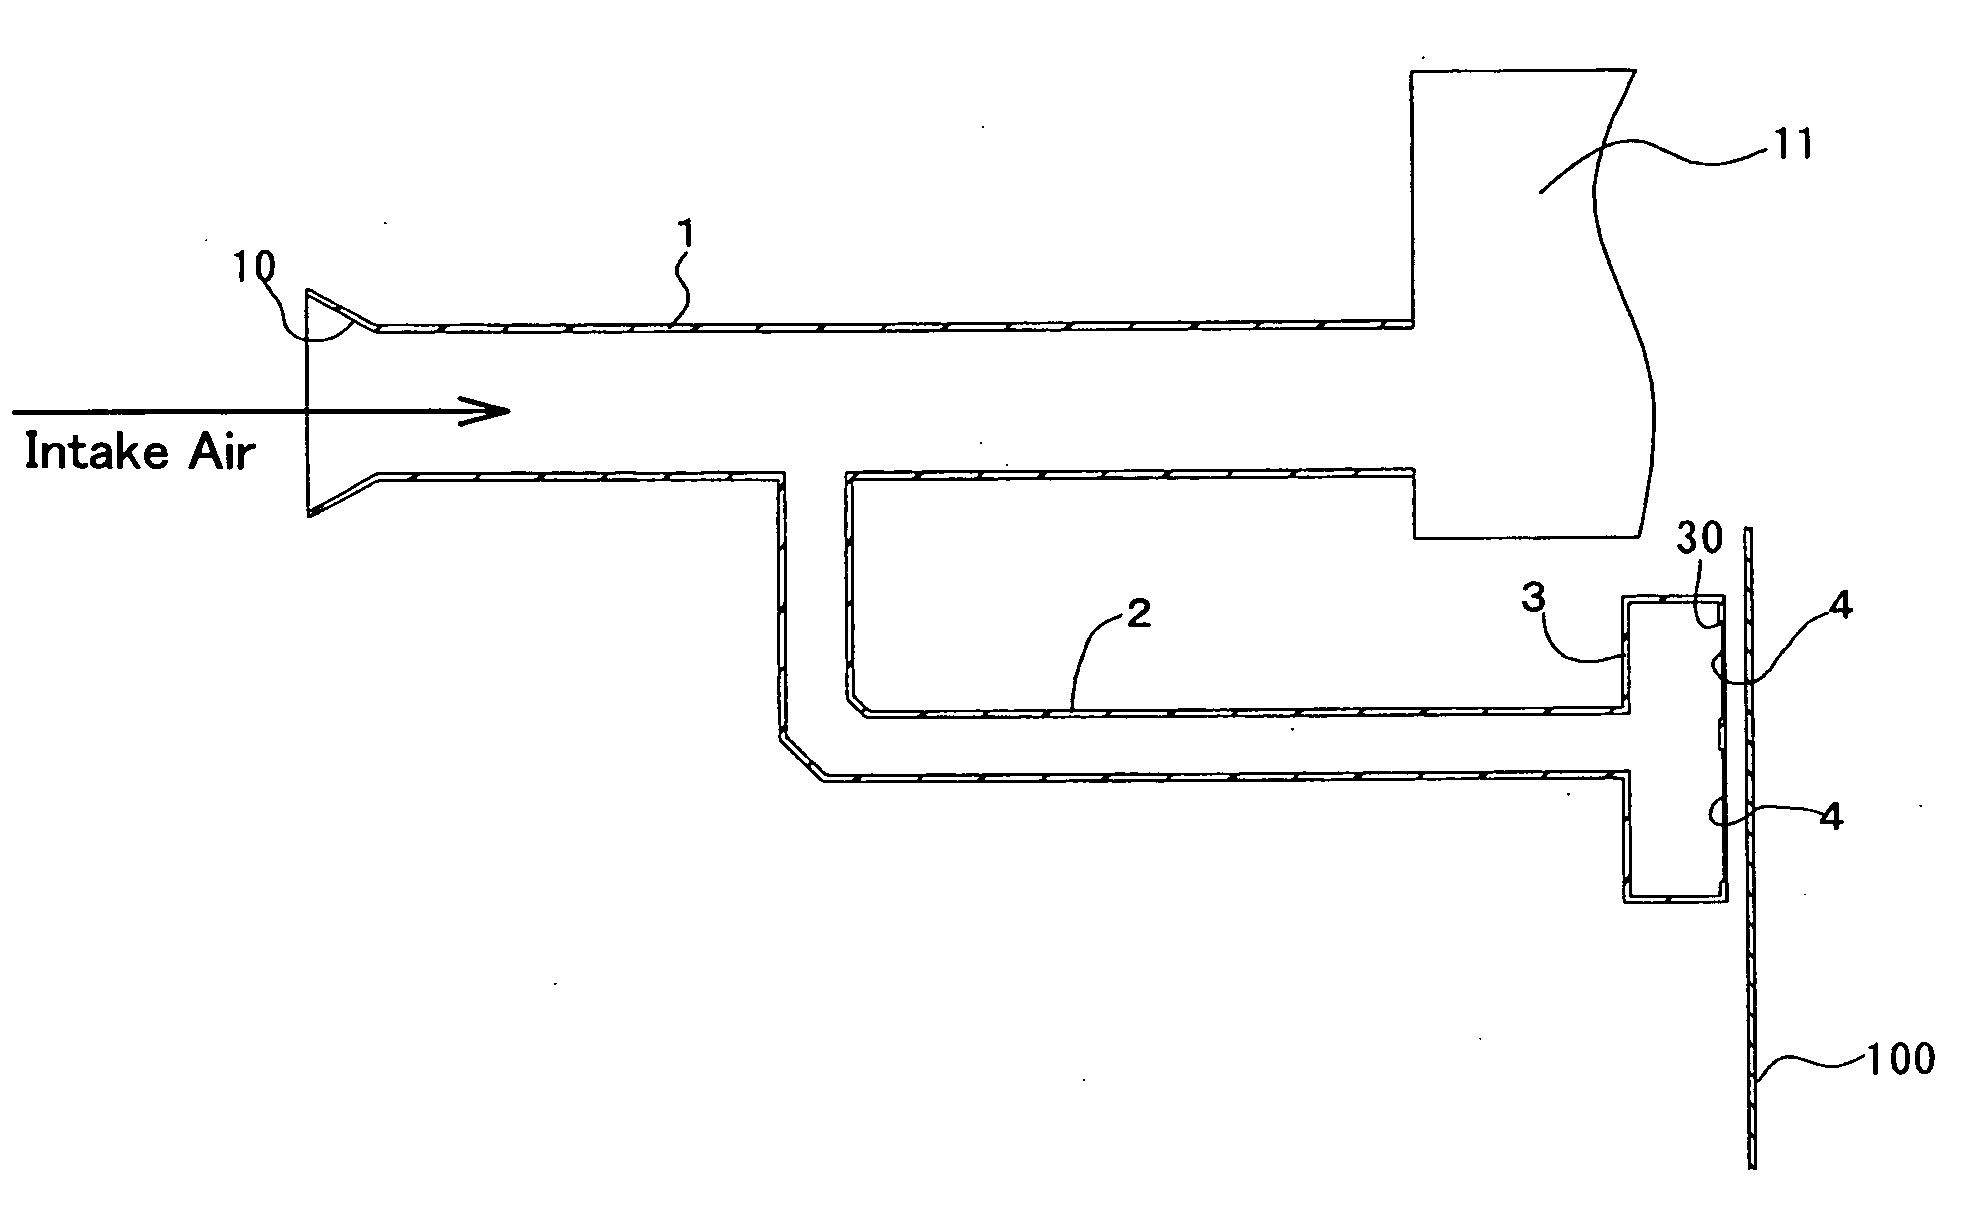 Air intake sound control structure